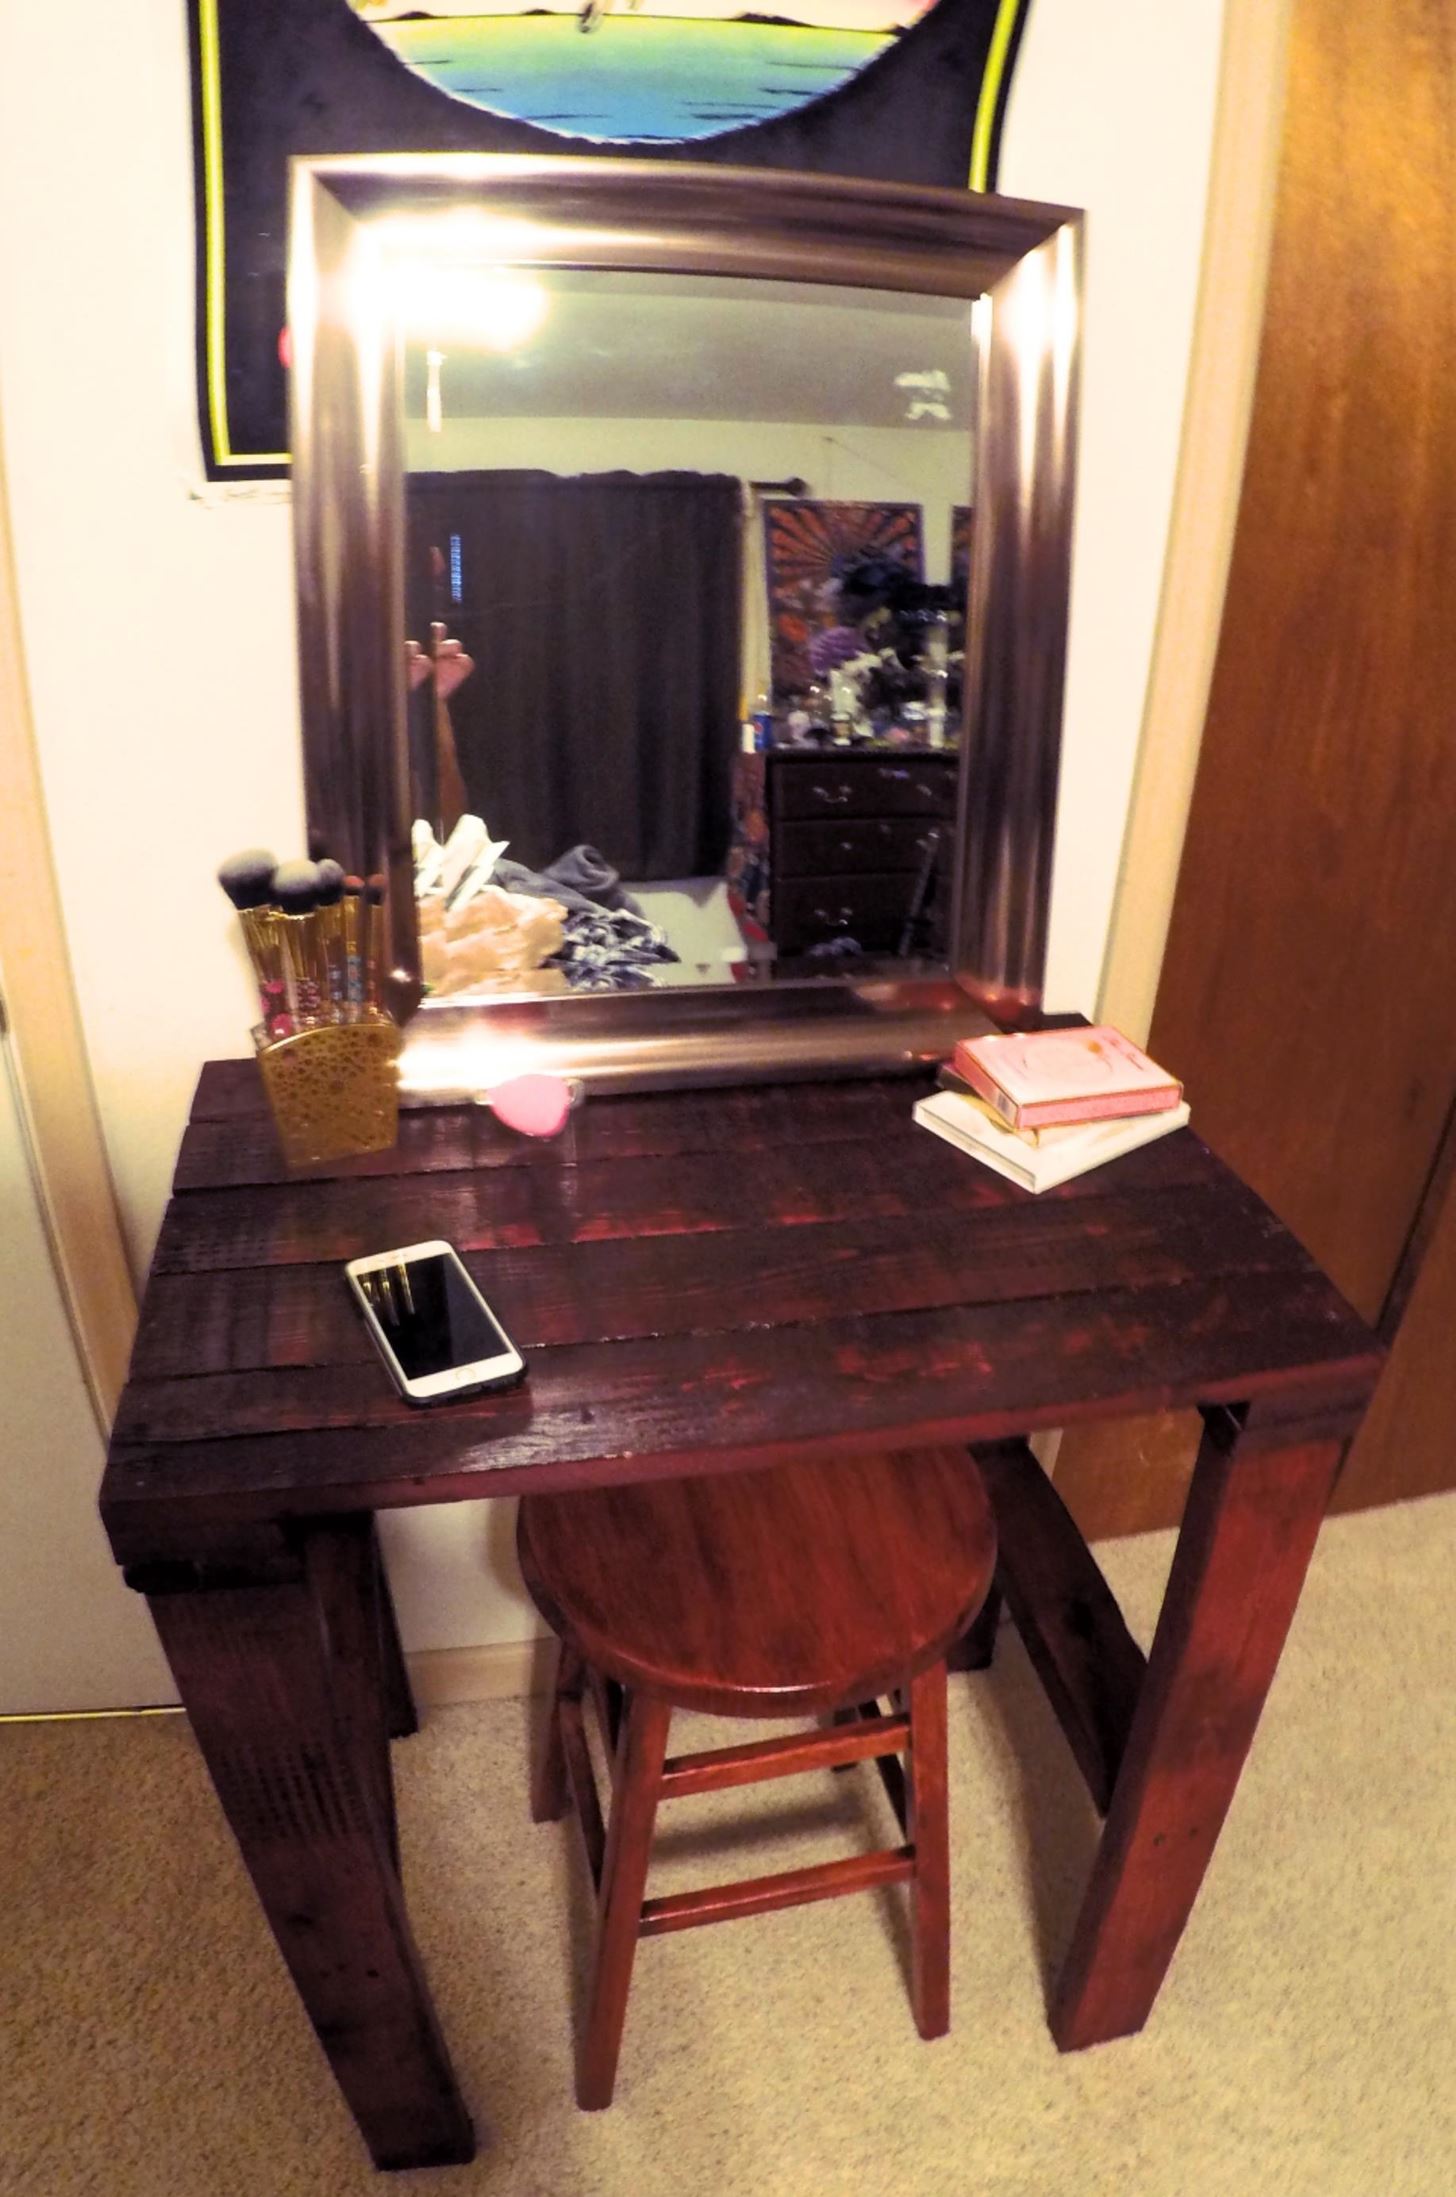 So I Made a Vanity Out of Pallets (Heat Treated)